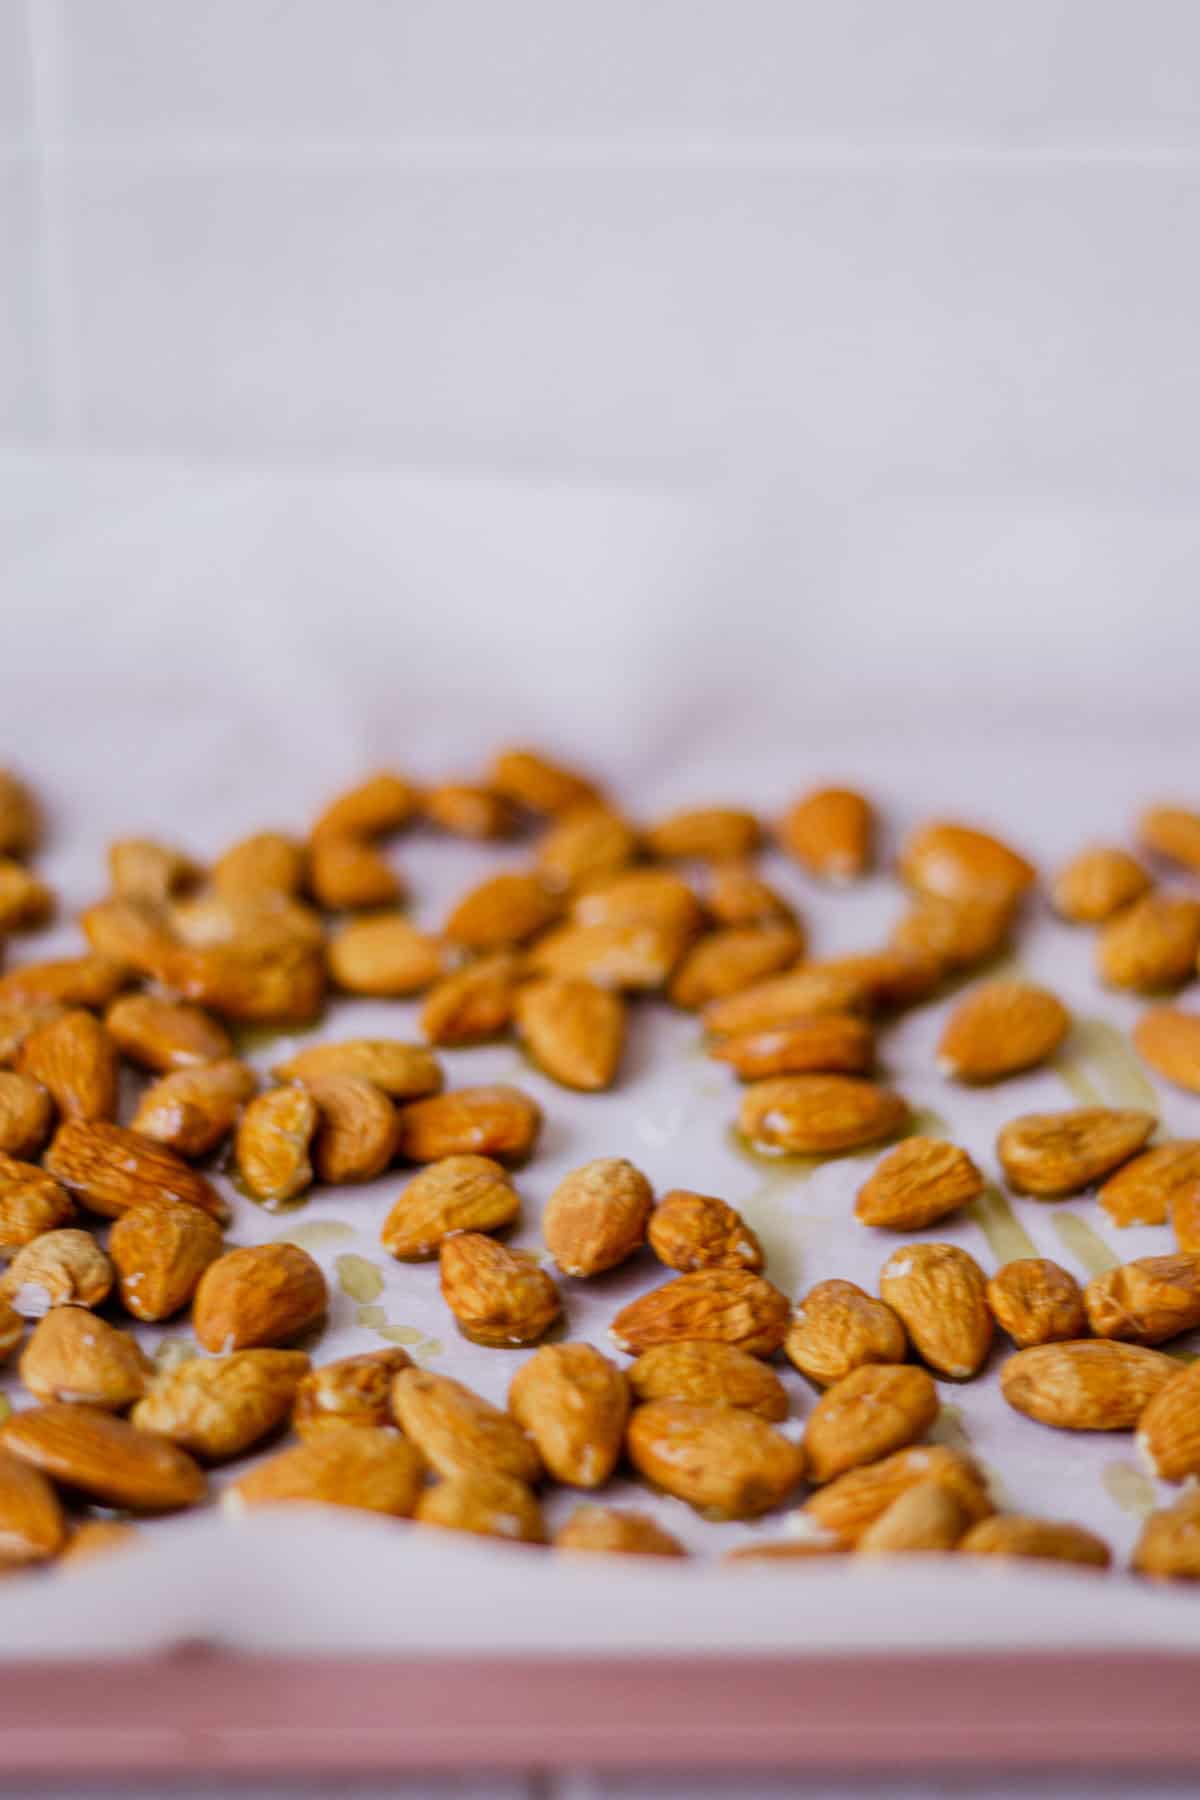 Side view of raw almonds, sprinkled with salt and olive oil on a baking tray lined with parchment paper.